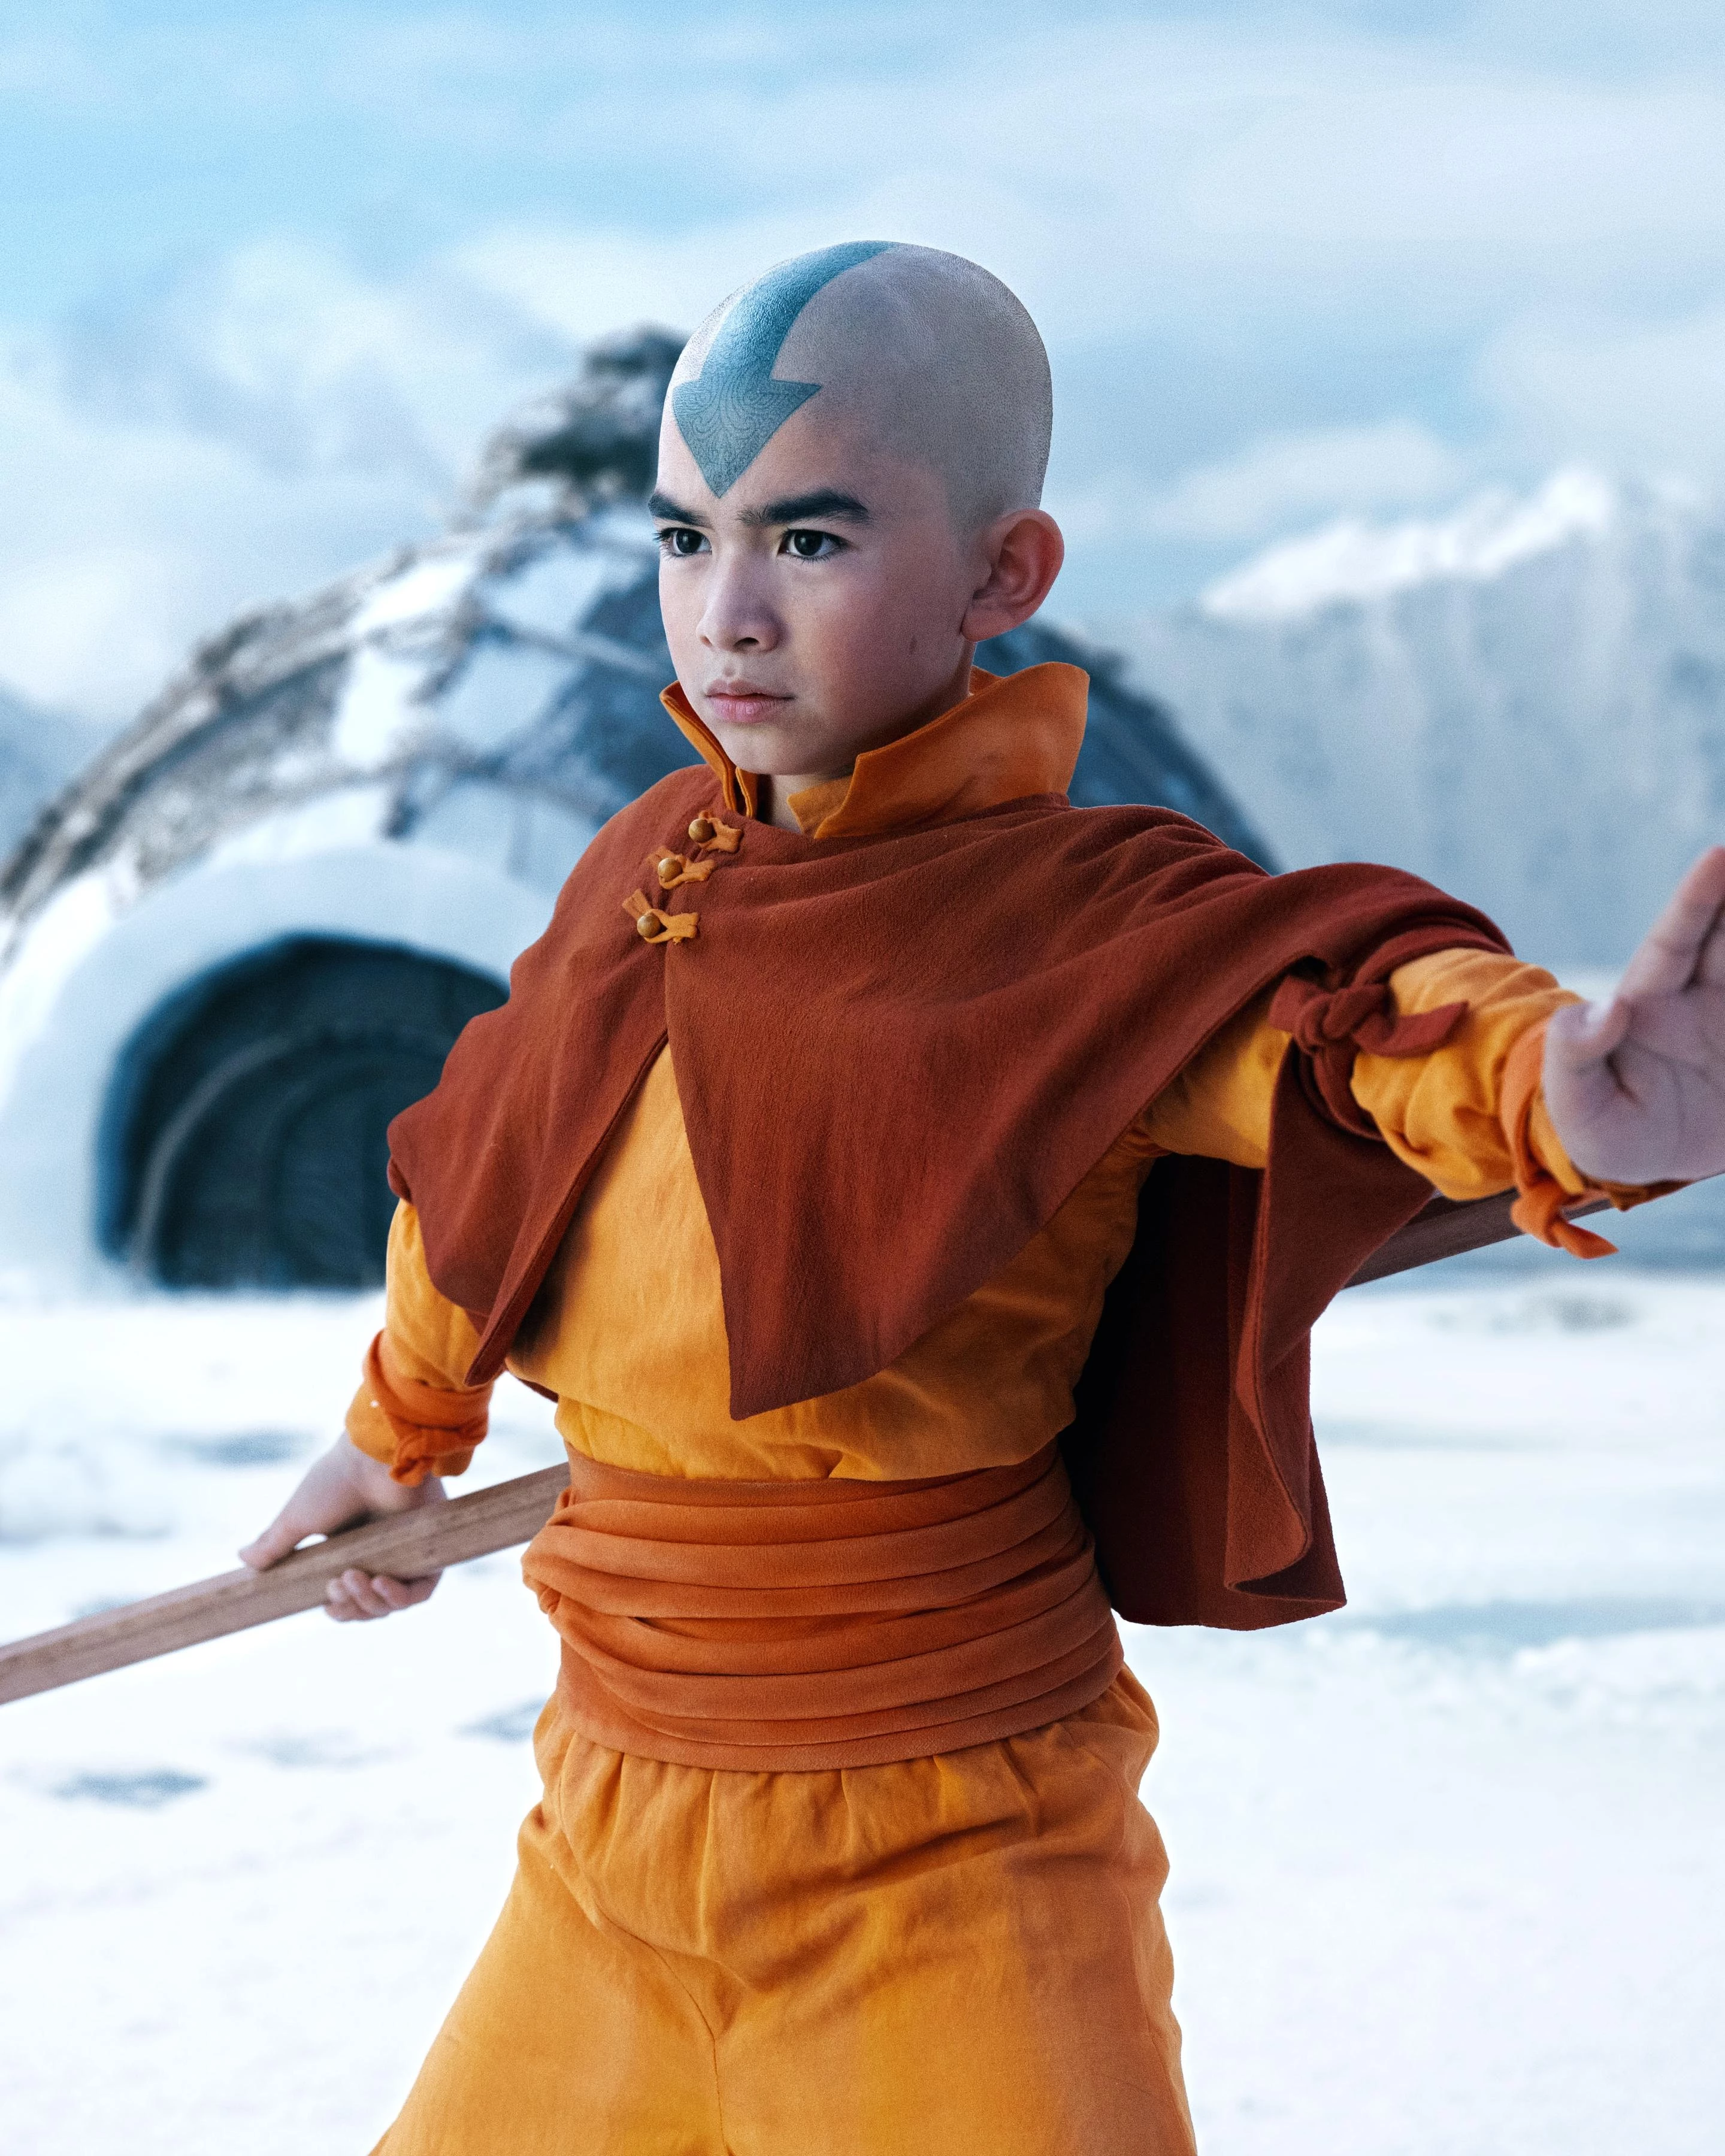 The New Aang Won’t Be Gender-Bent Like The Last, As He’s Played By Gordon Cormier